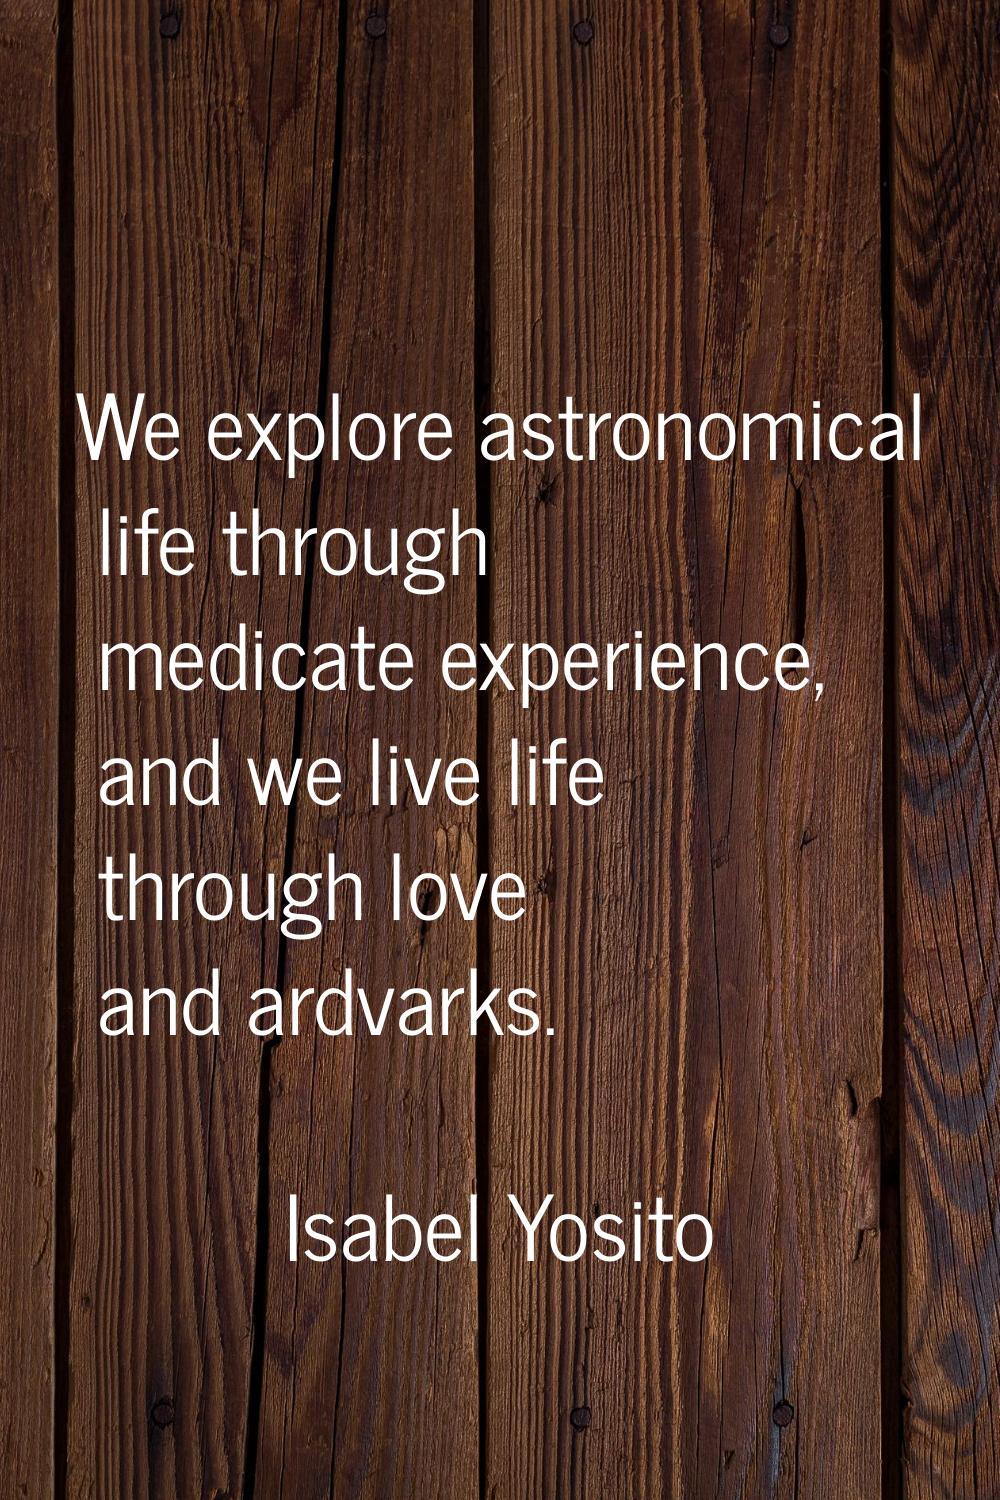 We explore astronomical life through medicate experience, and we live life through love and ardvark